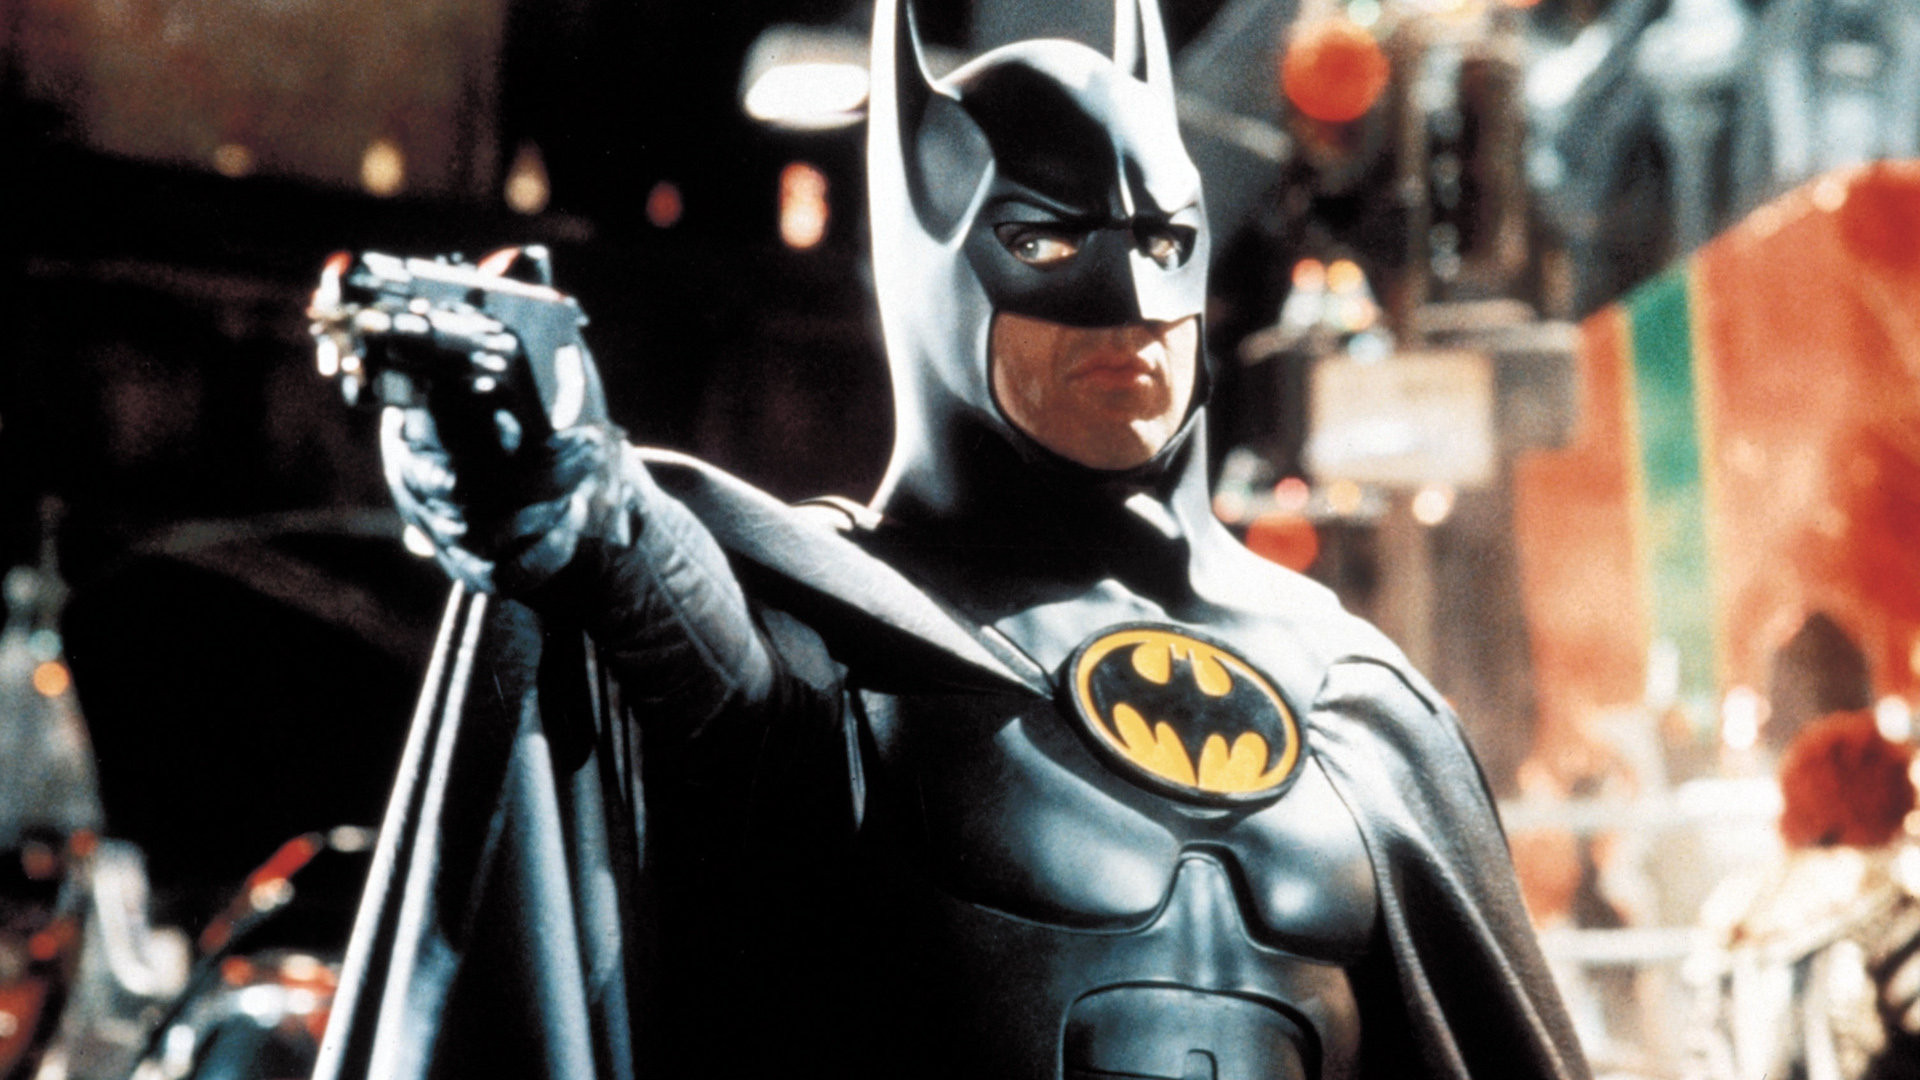 Whats your view of the definitive Batman costume - The